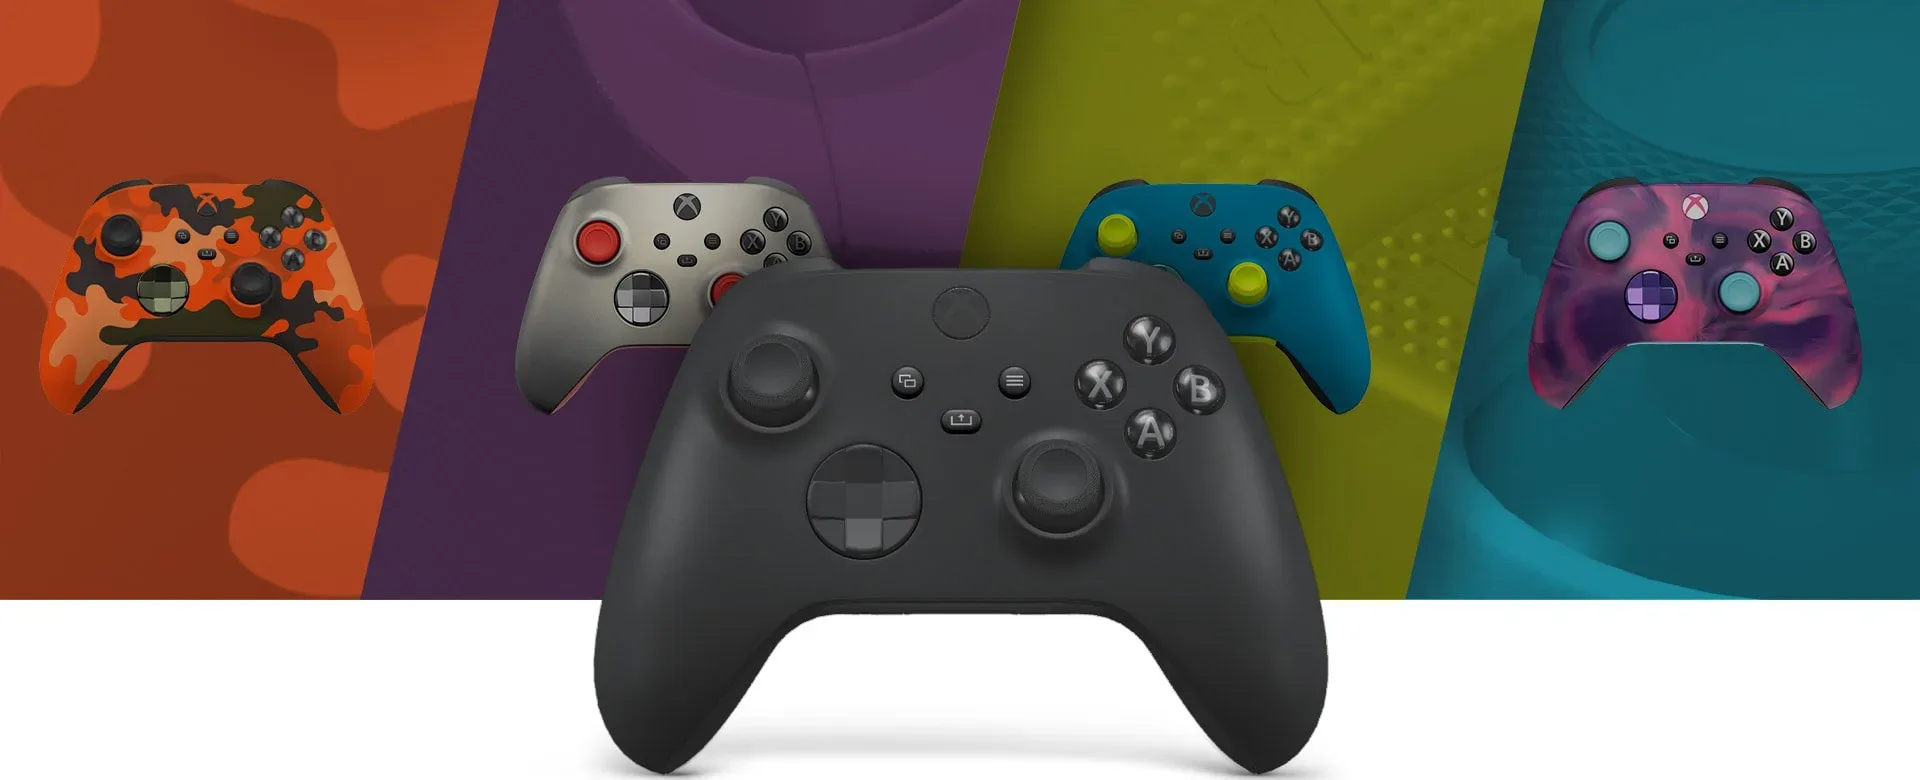 Available Colors and Designs Xbox Series X controller